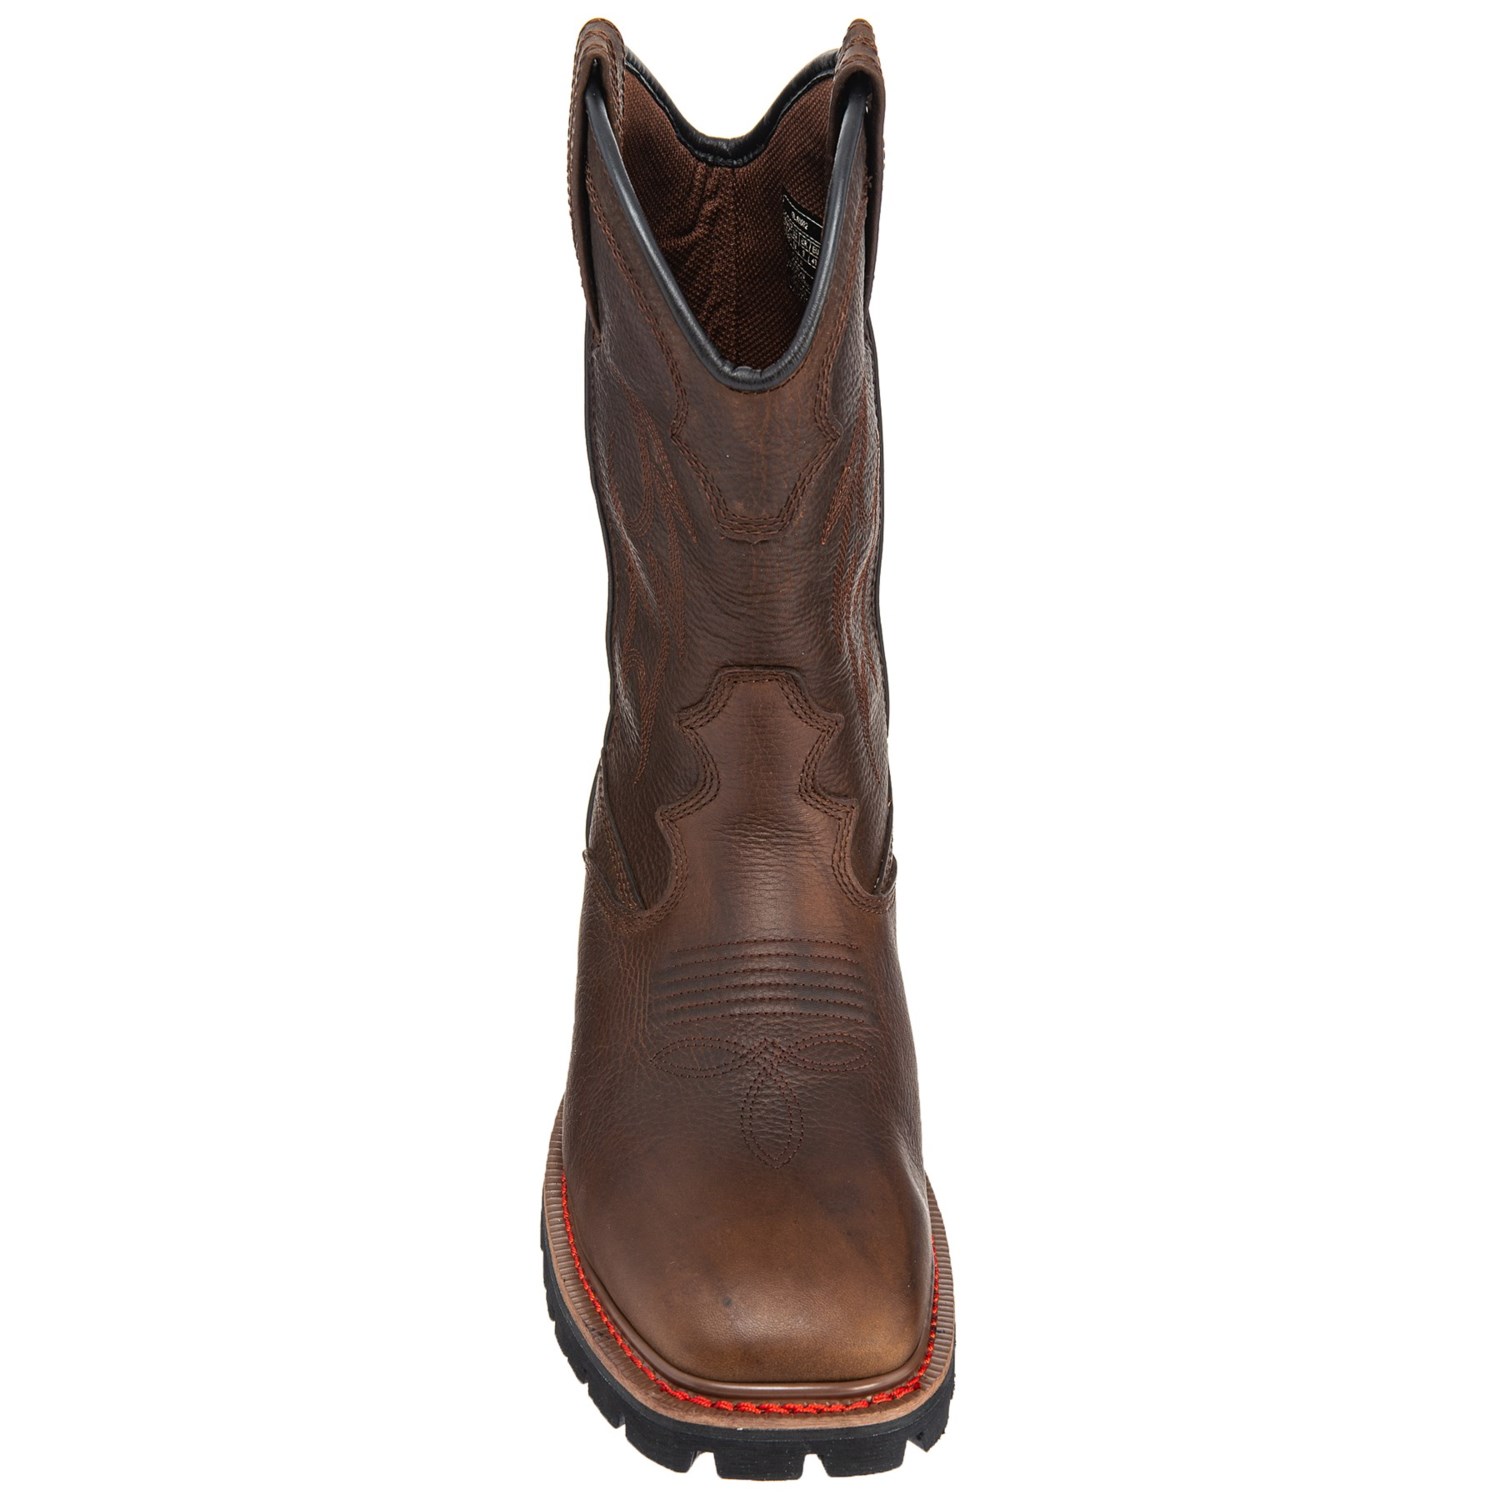 oliver western style square toe work boots